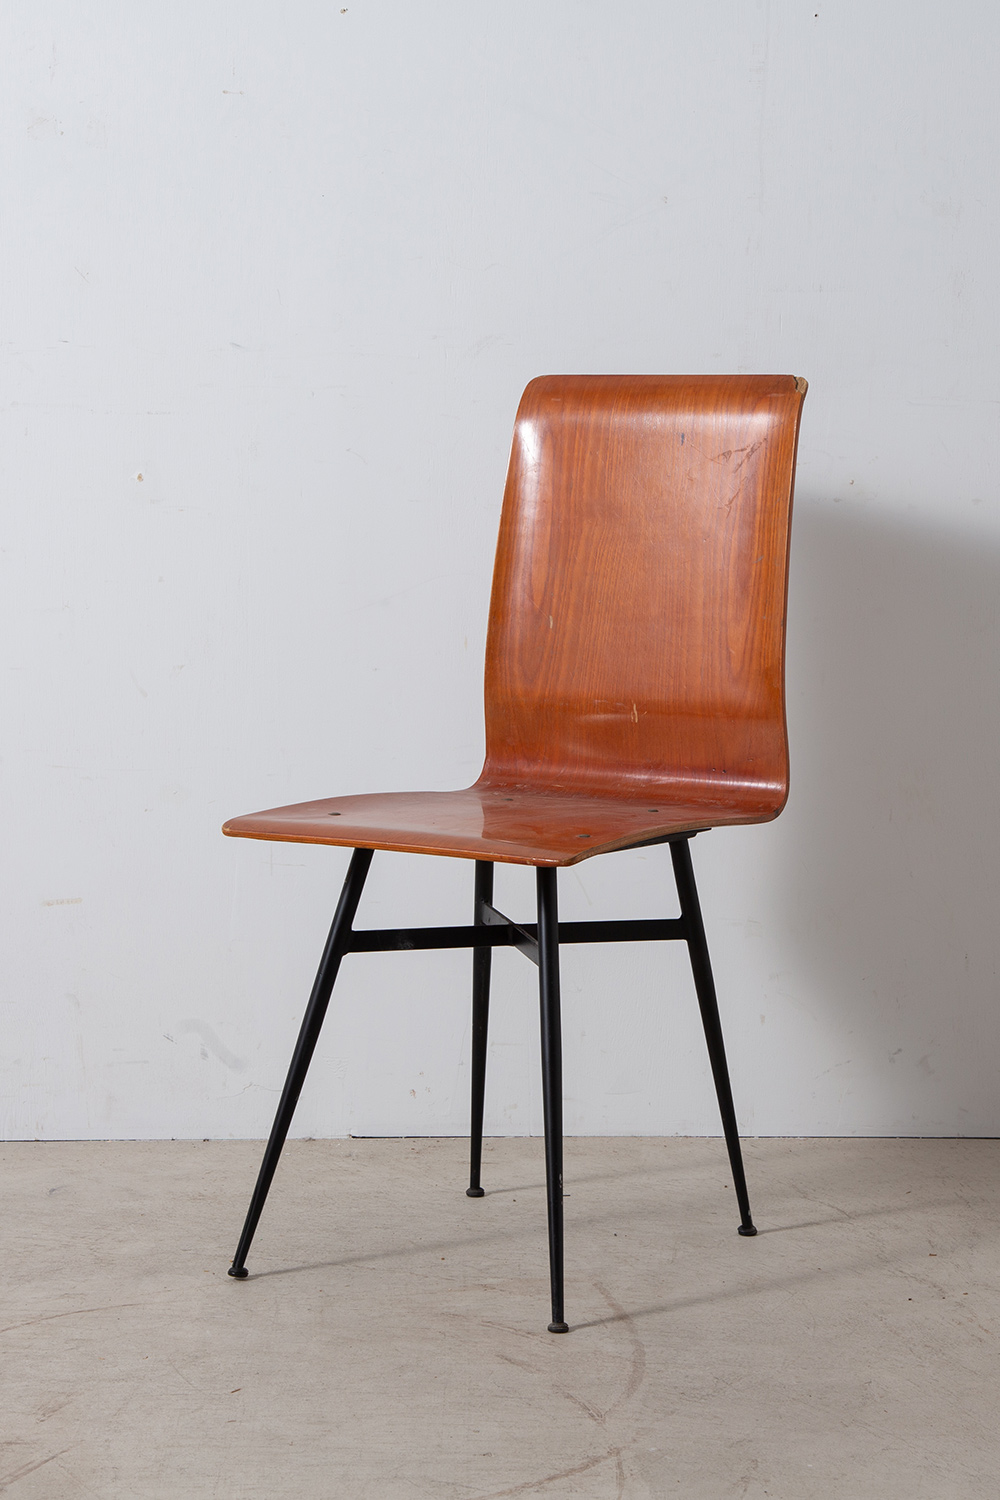 Italian Vintage Plywood Chair in Black and Wood